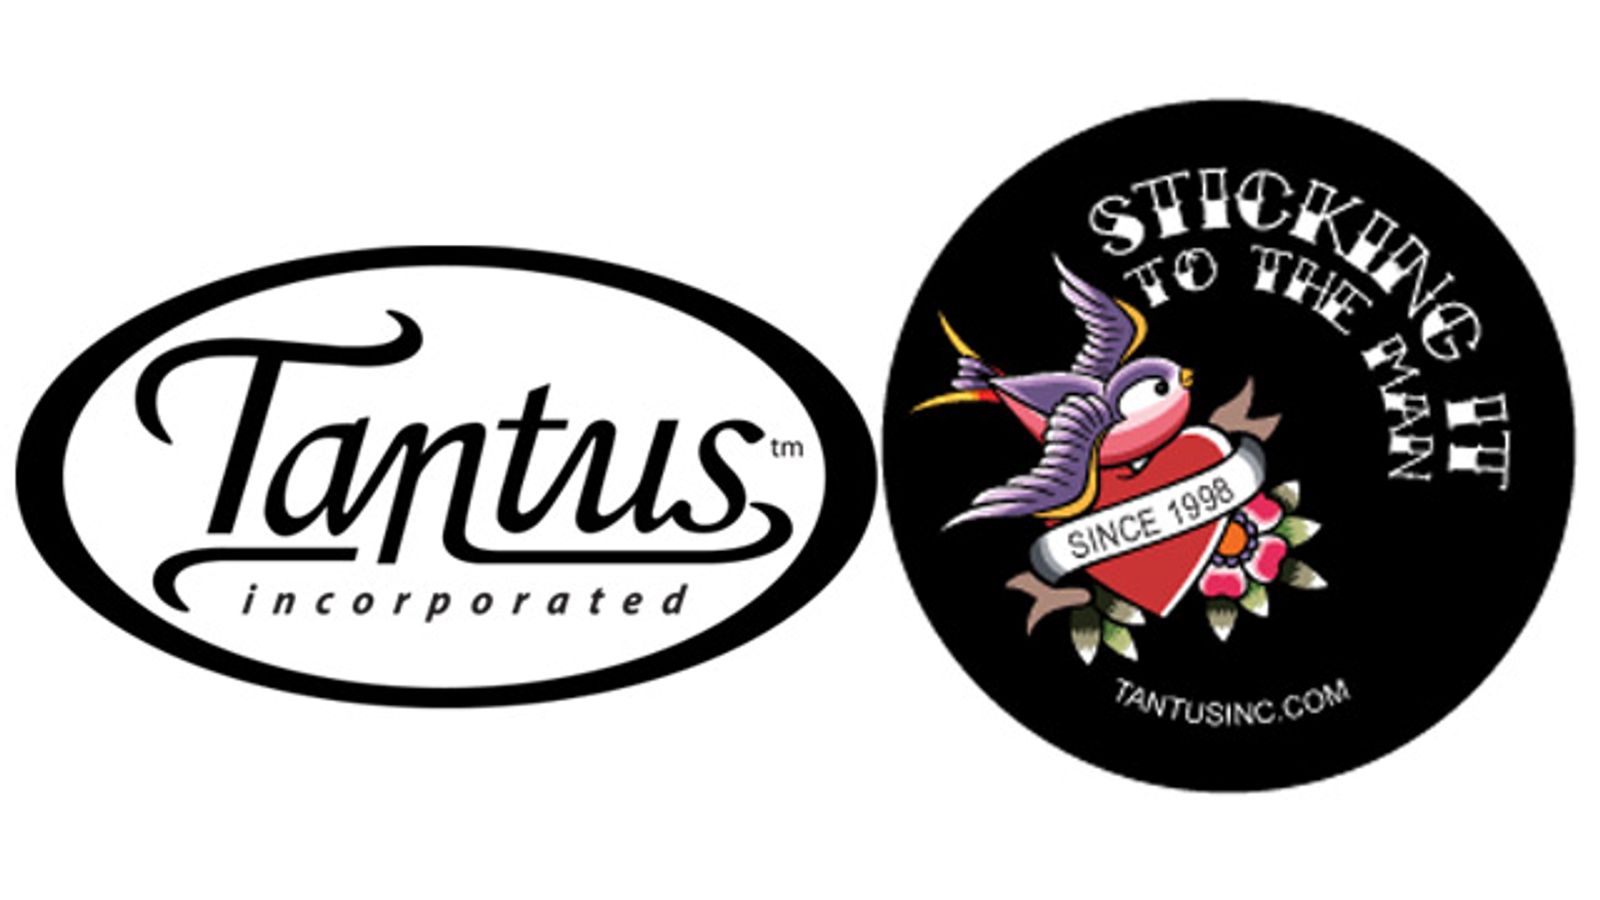 Tantus Unveils ‘Sticking It To The Man’ Campaign